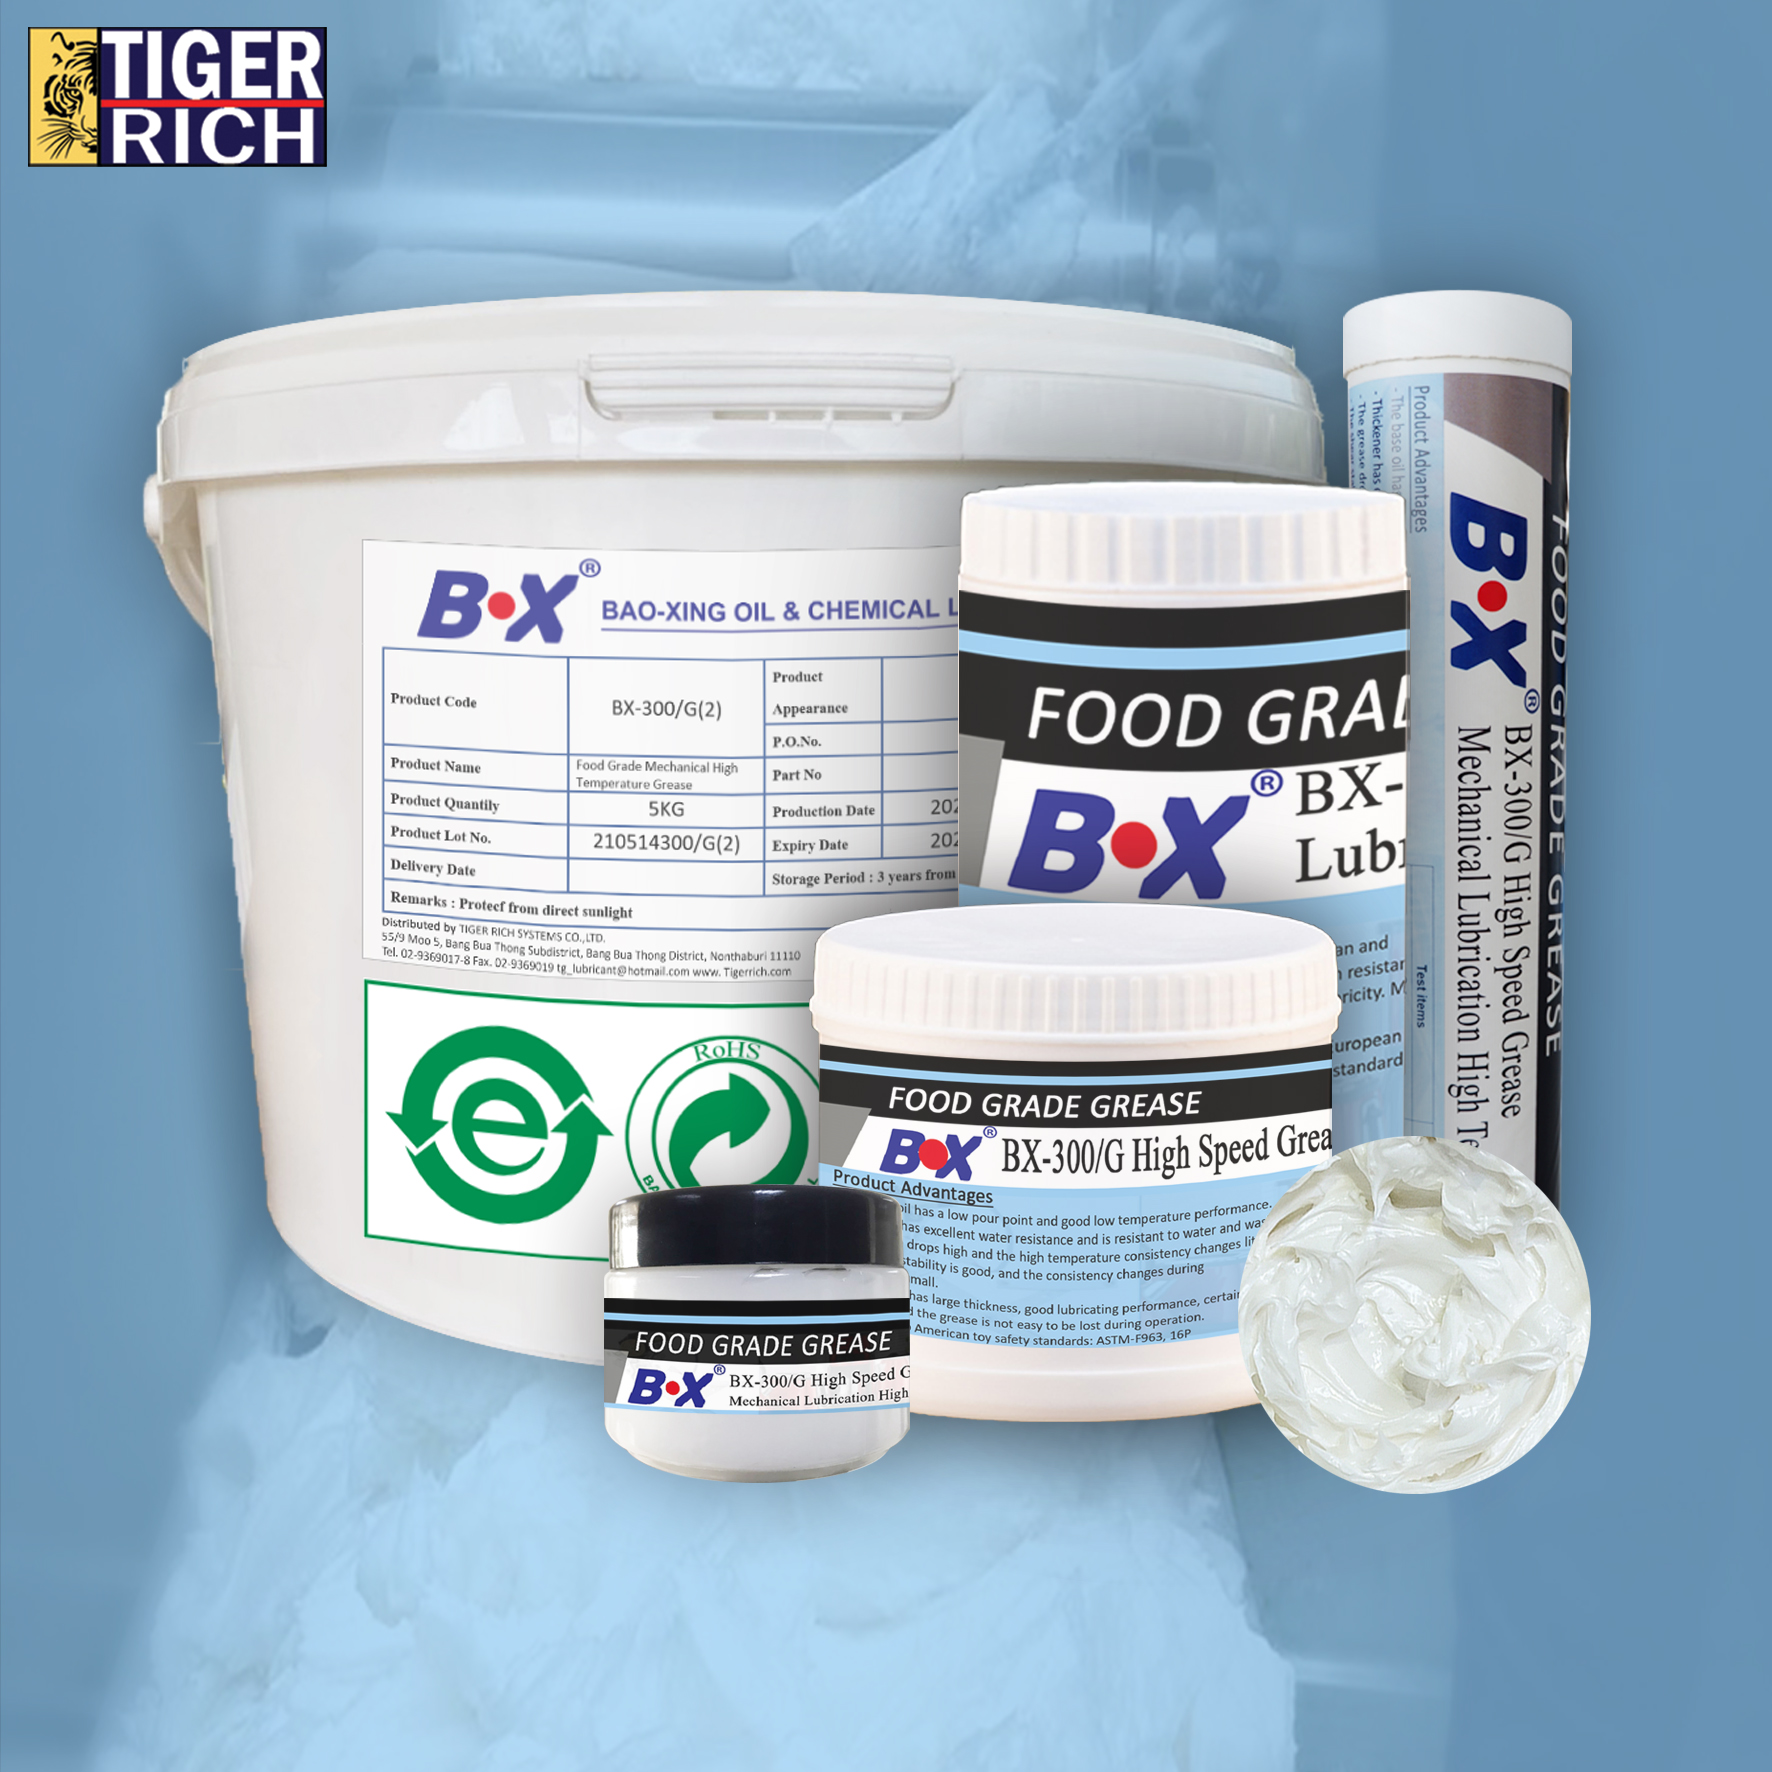 BX-300/G High Speed Grease Mechanical Lubrication High Temperature